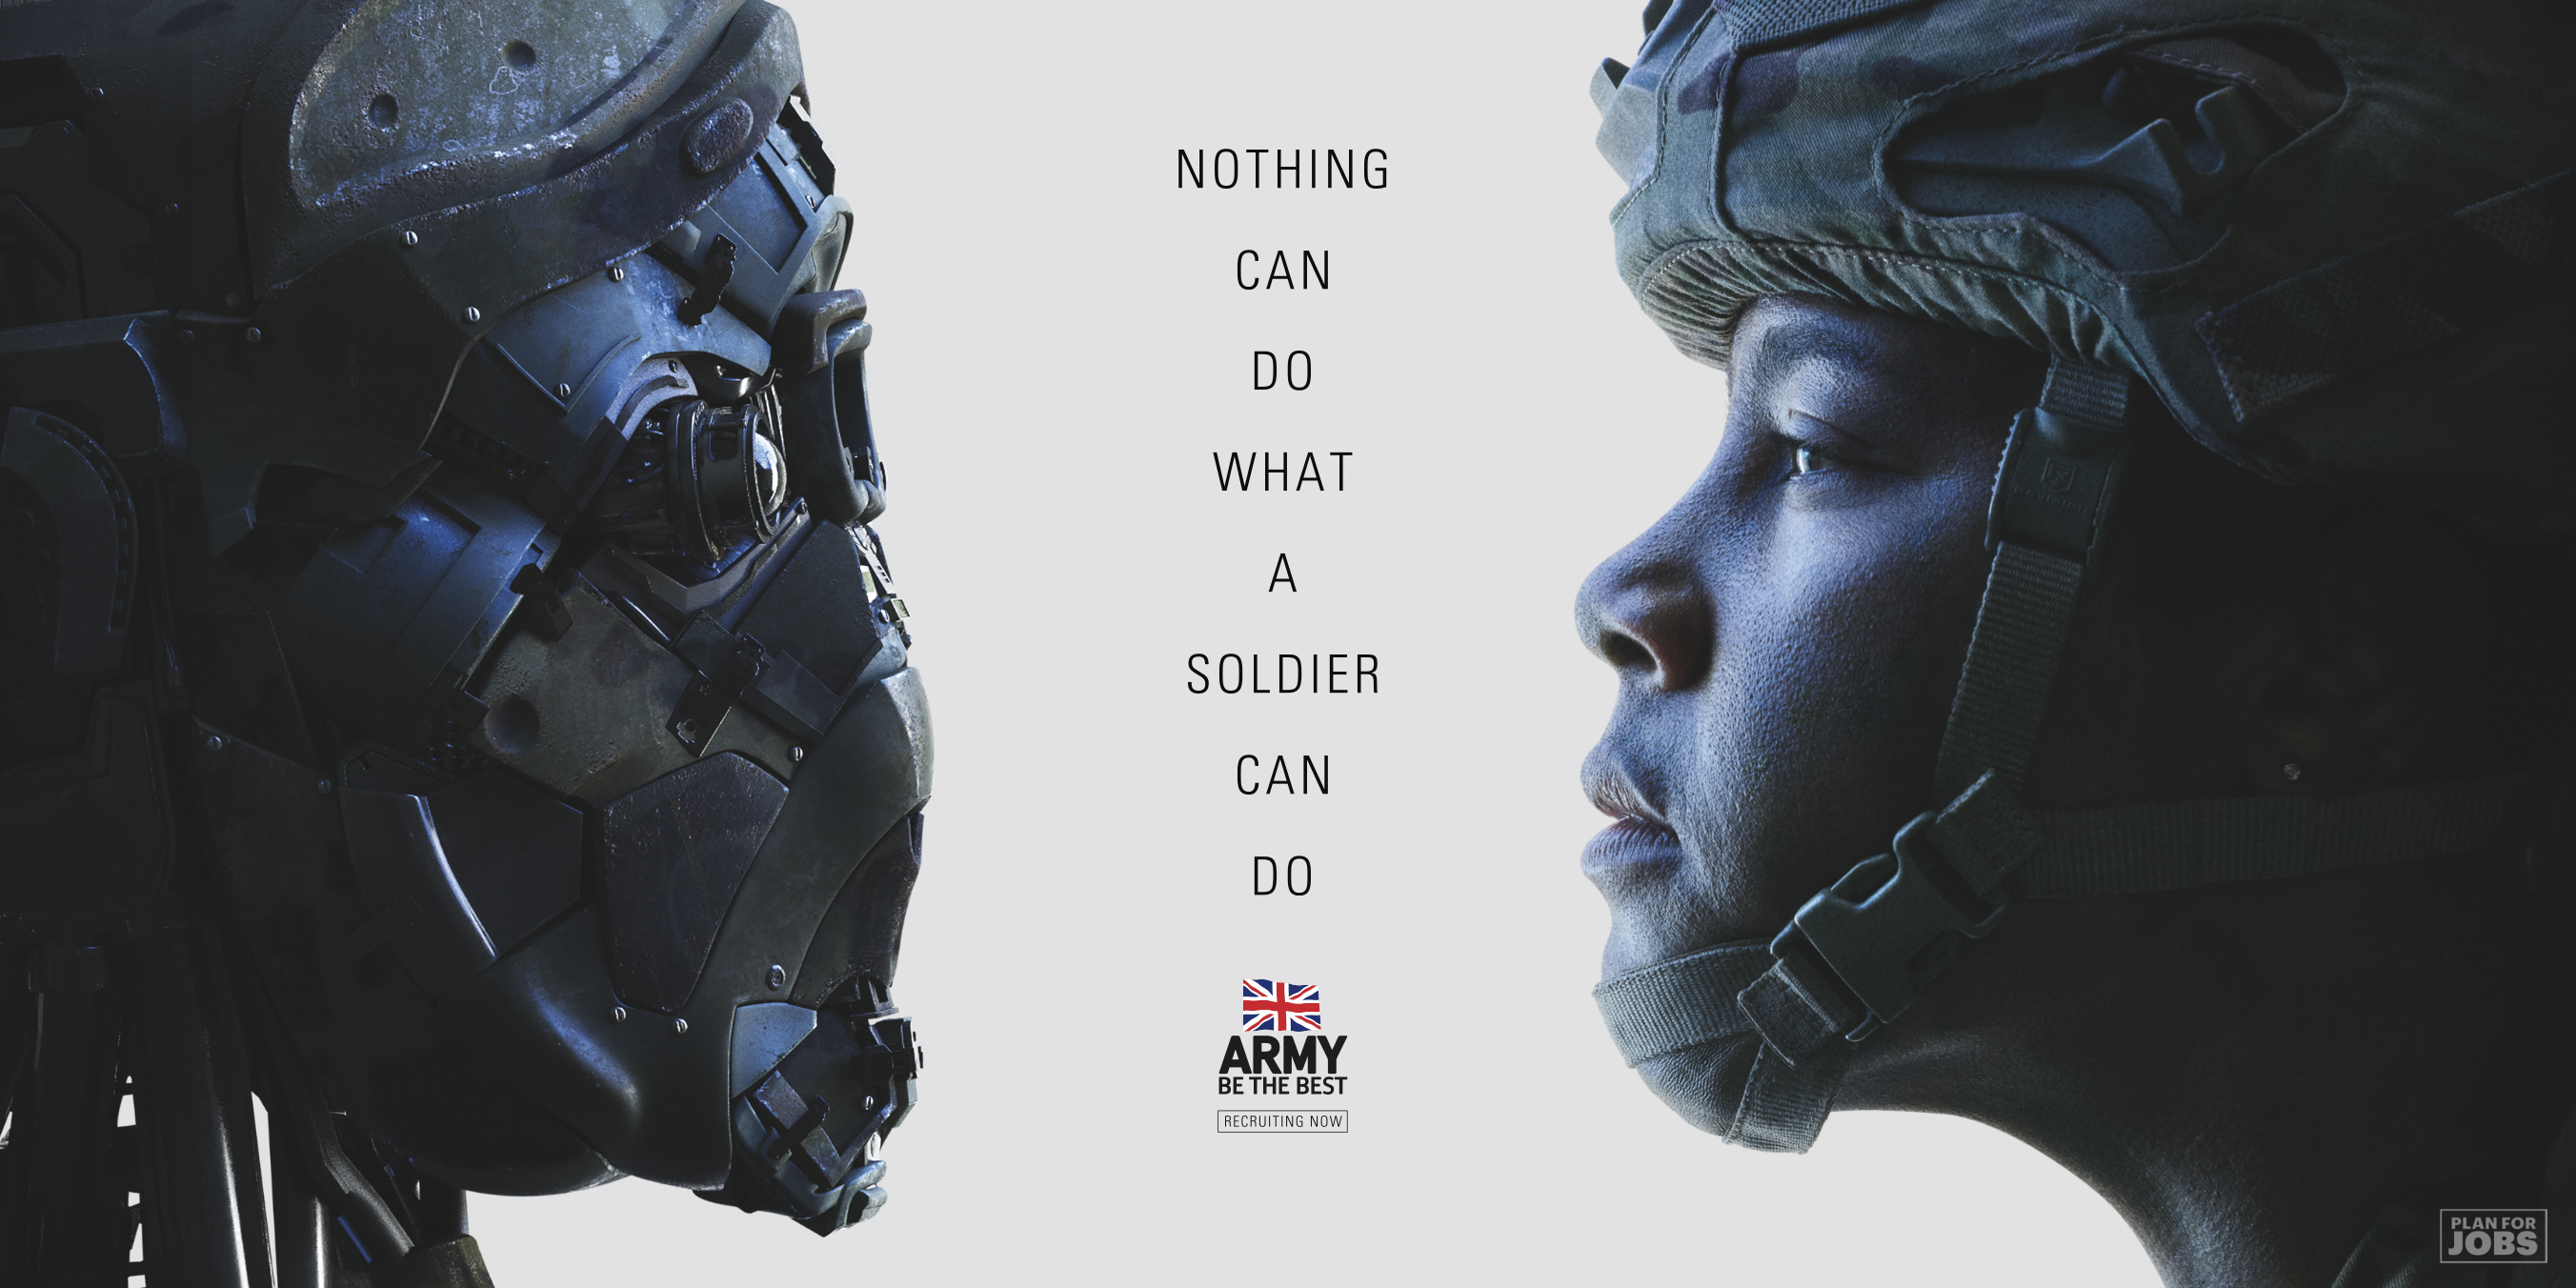 A promo of the British Army-s Nothing Can Do What a Soldier Can Do campaign